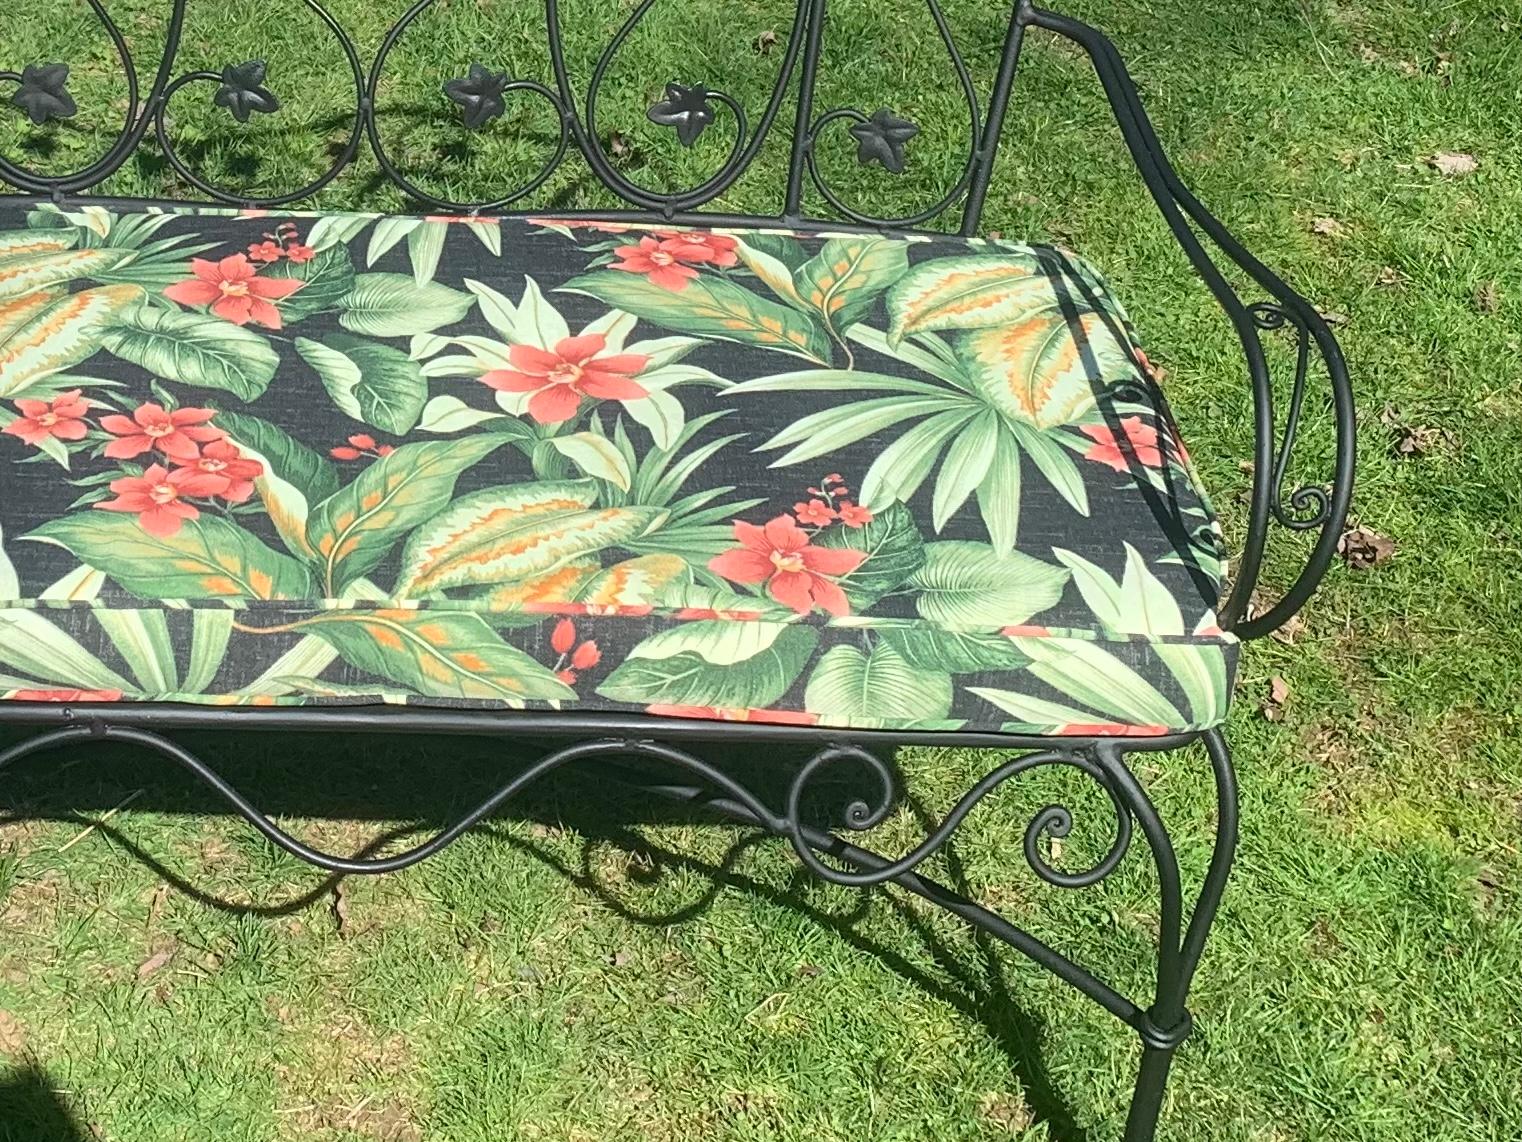 Salterini Style Garden Bench with Custom Cushion.

Intricate Ivy Leaf Detail on Back Rest of Garden Settee/Bench. Generously sized seating for 2. Lattice bottom. Custom cushion made with DryFast Marine Foam is a solarium print. Perfect addition to